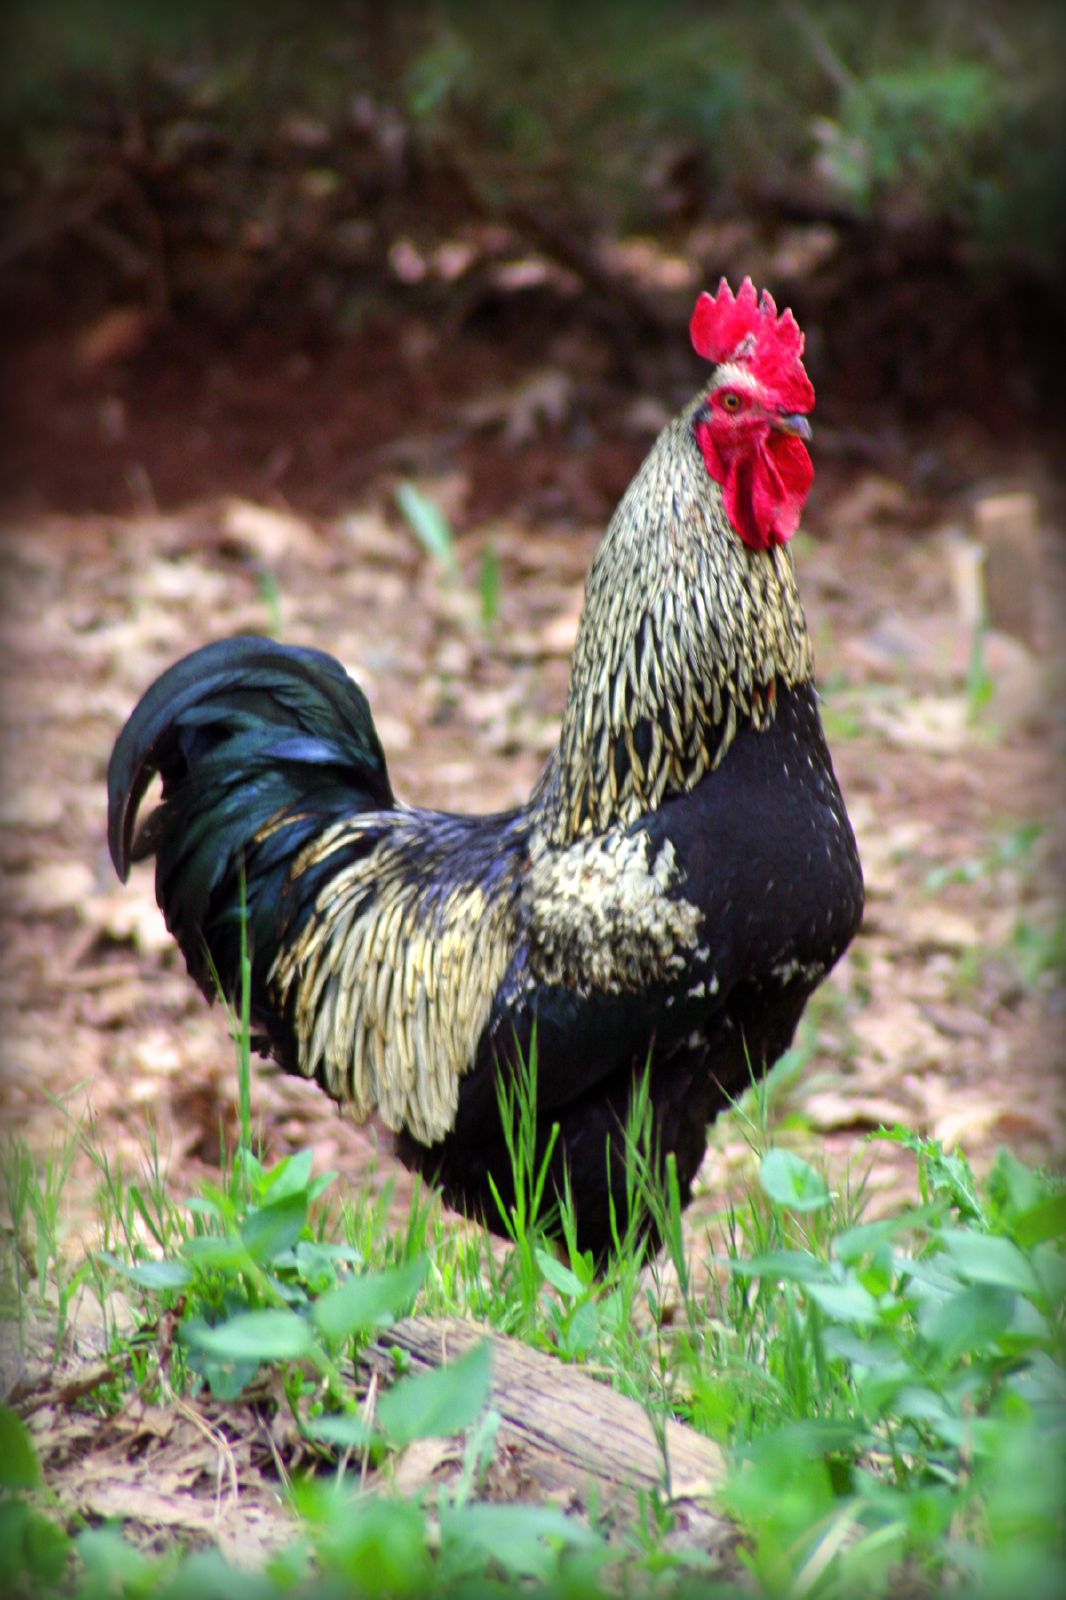 a large rooster standing on a grass covered field